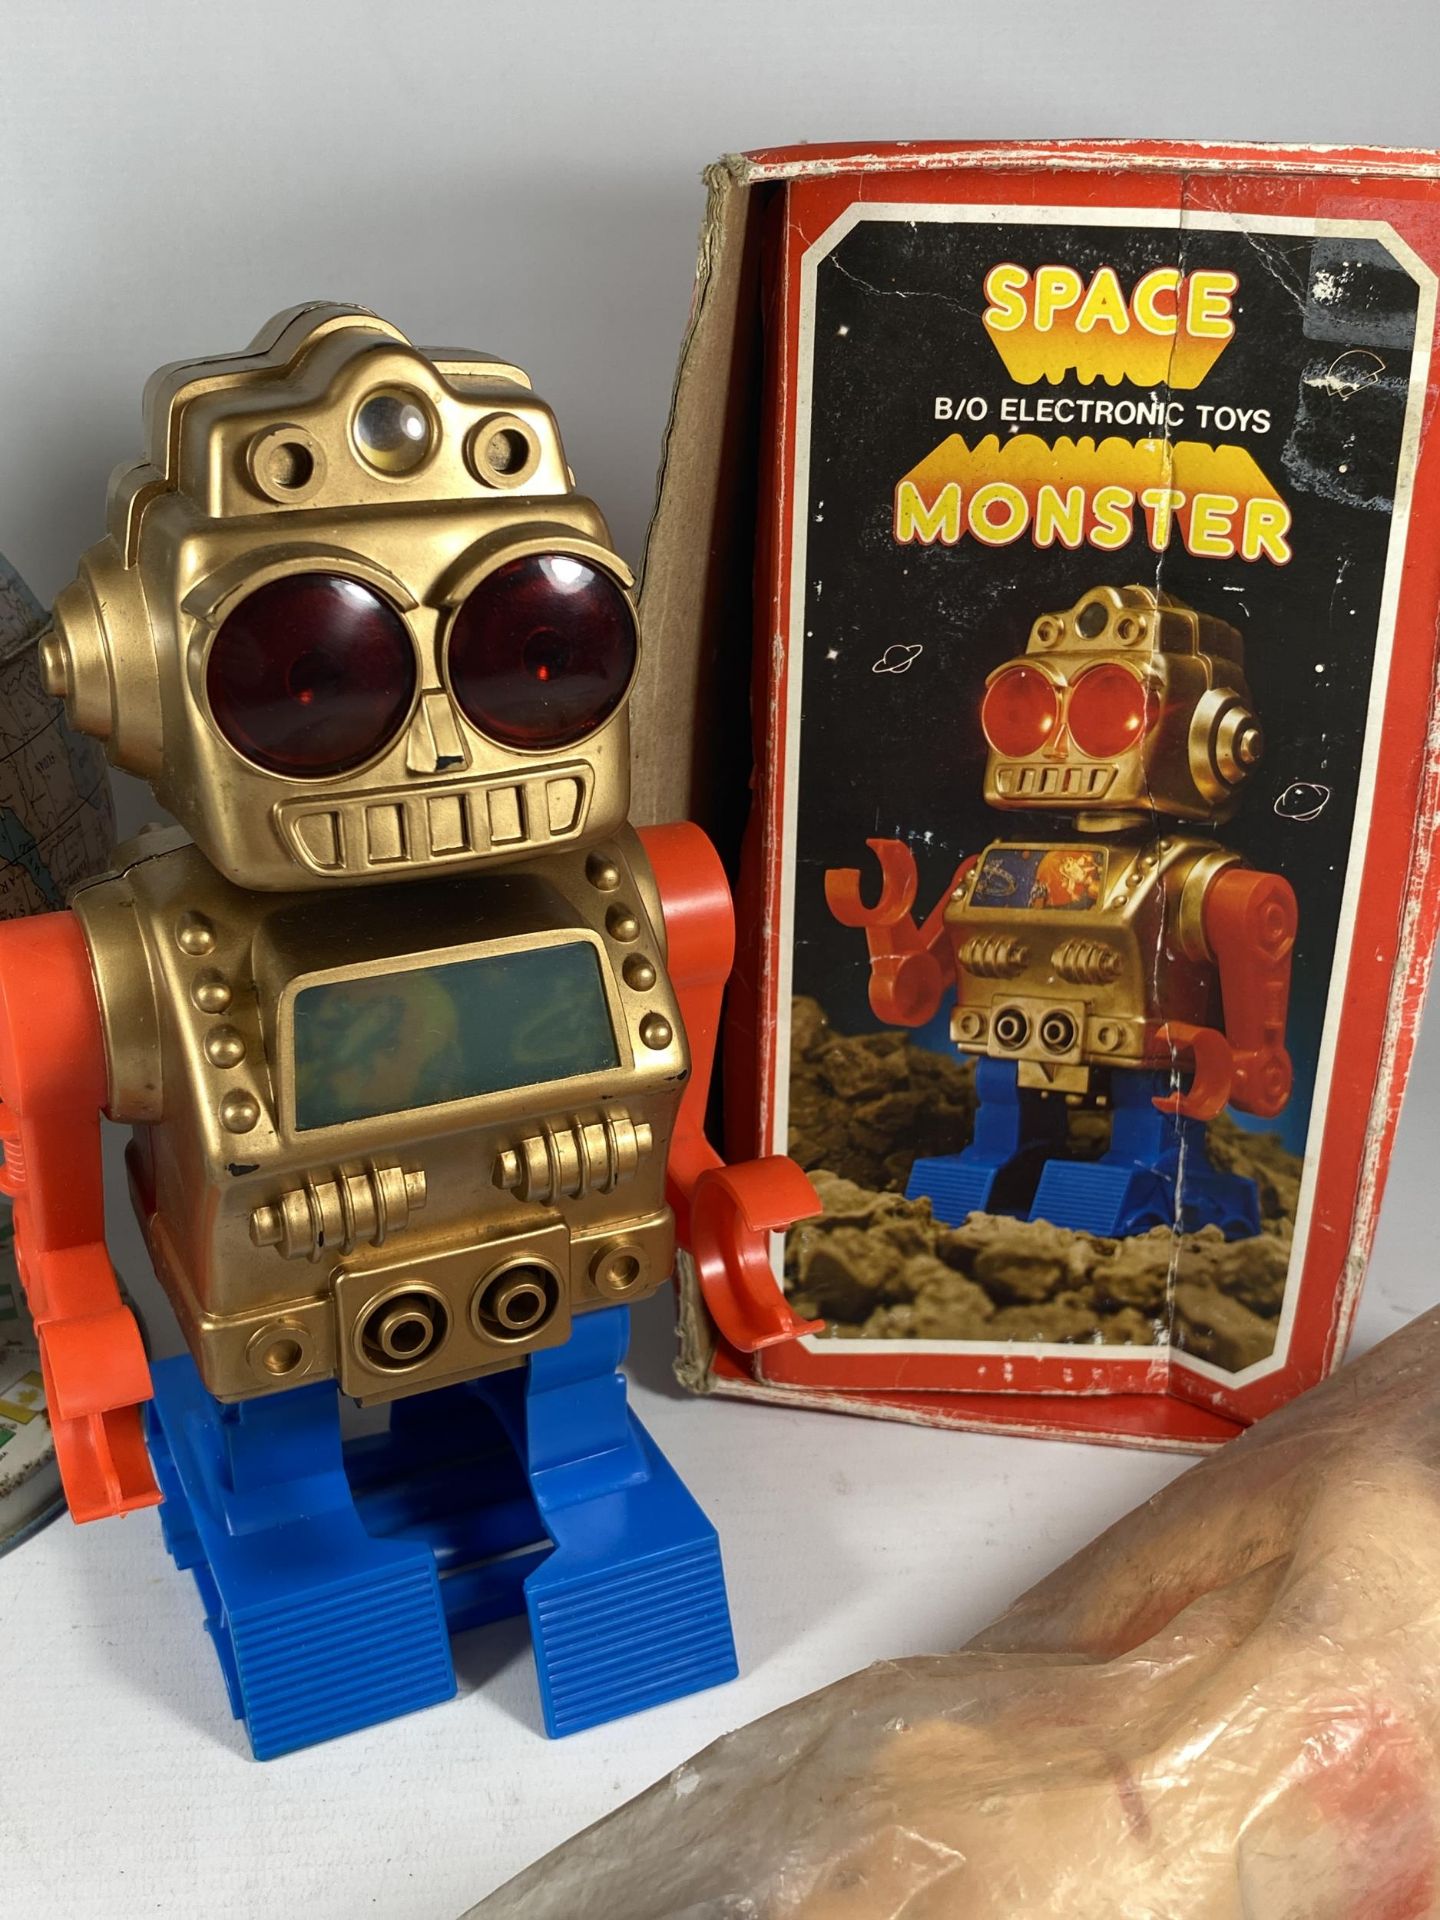 FOUR ITEMS - A BOXED ELECTRONIC SPACE MONSTER, PLASTIC FRED FLINTSTONE MONEY BANK, BOOK & TIN GLOBE - Image 3 of 4